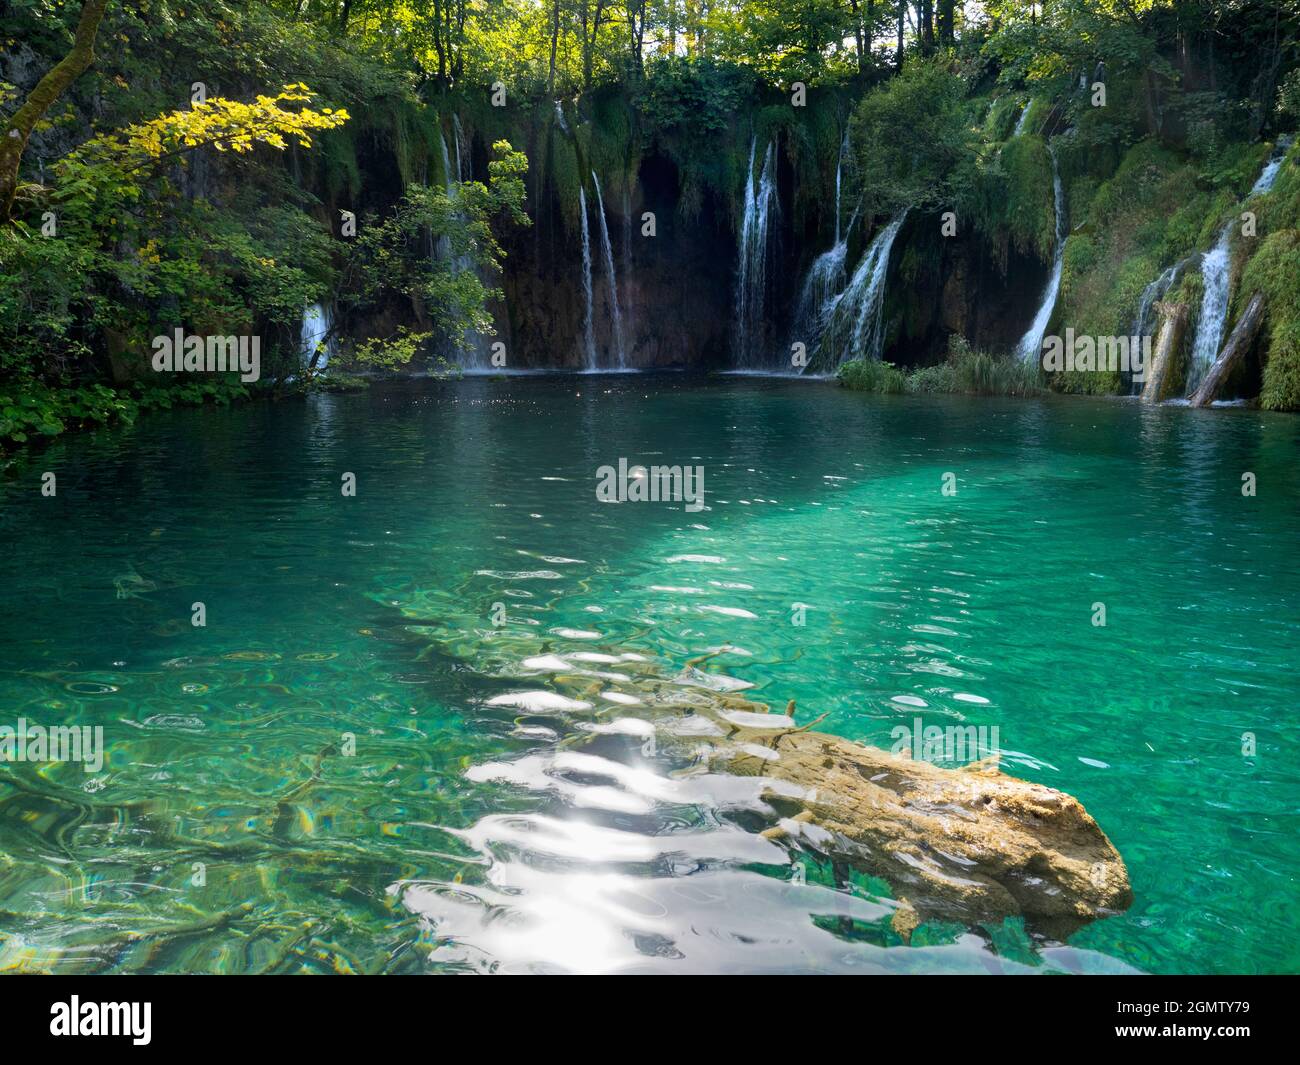 A UNESCO World Heritage Site, Plitvice Lakes National Park is one of the oldest national parks in Southeast Europe and the largest in Croatia. It has Stock Photo